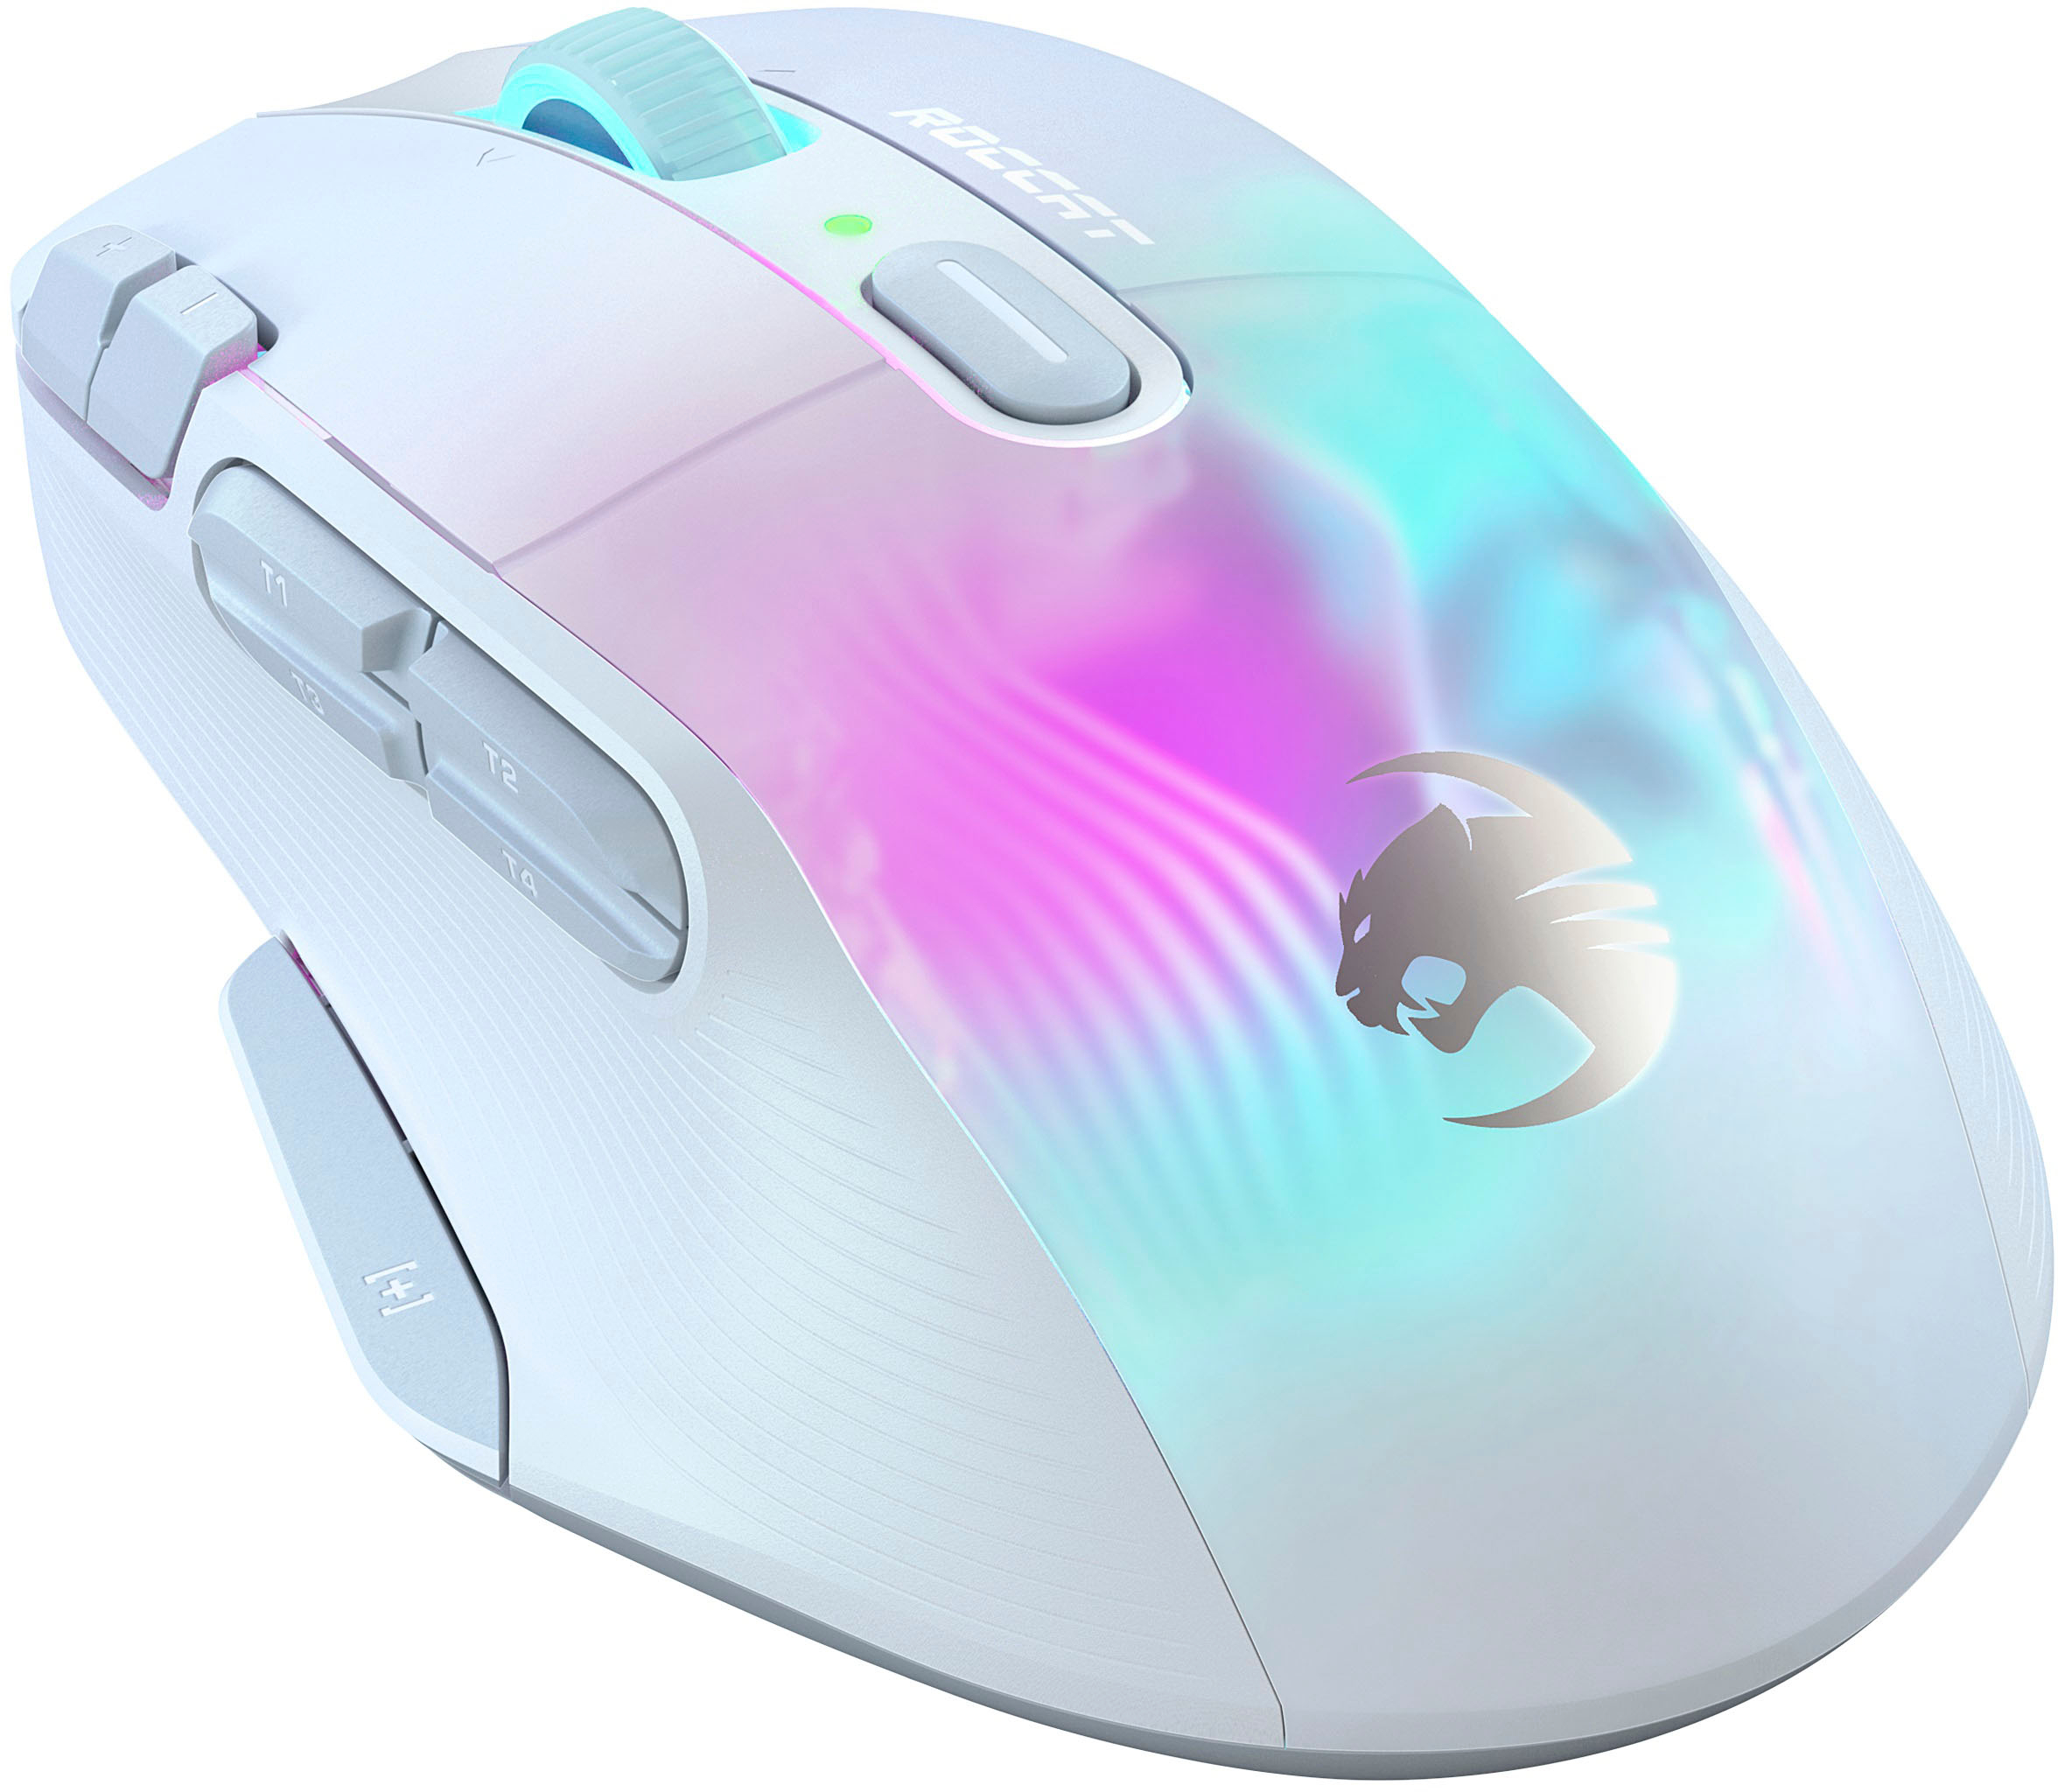 ROCCAT Kone XP Gaming Mouse ROC-11-425-02 White - Ecomedia AG